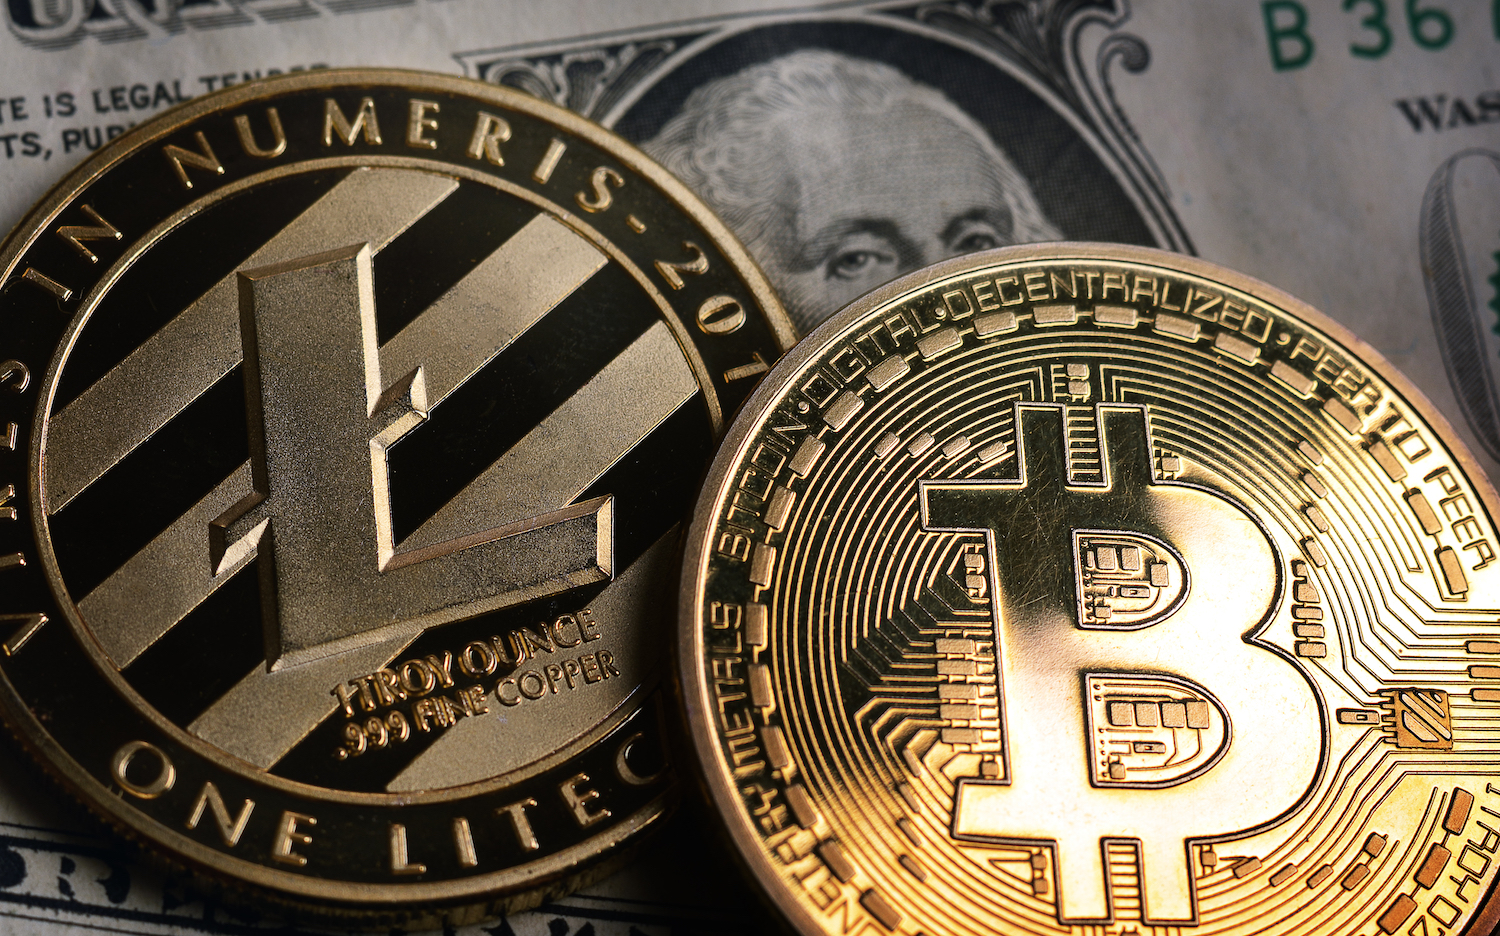 Bitcoin Price Still Trading Flat While Litecoin Hits 7-Month High